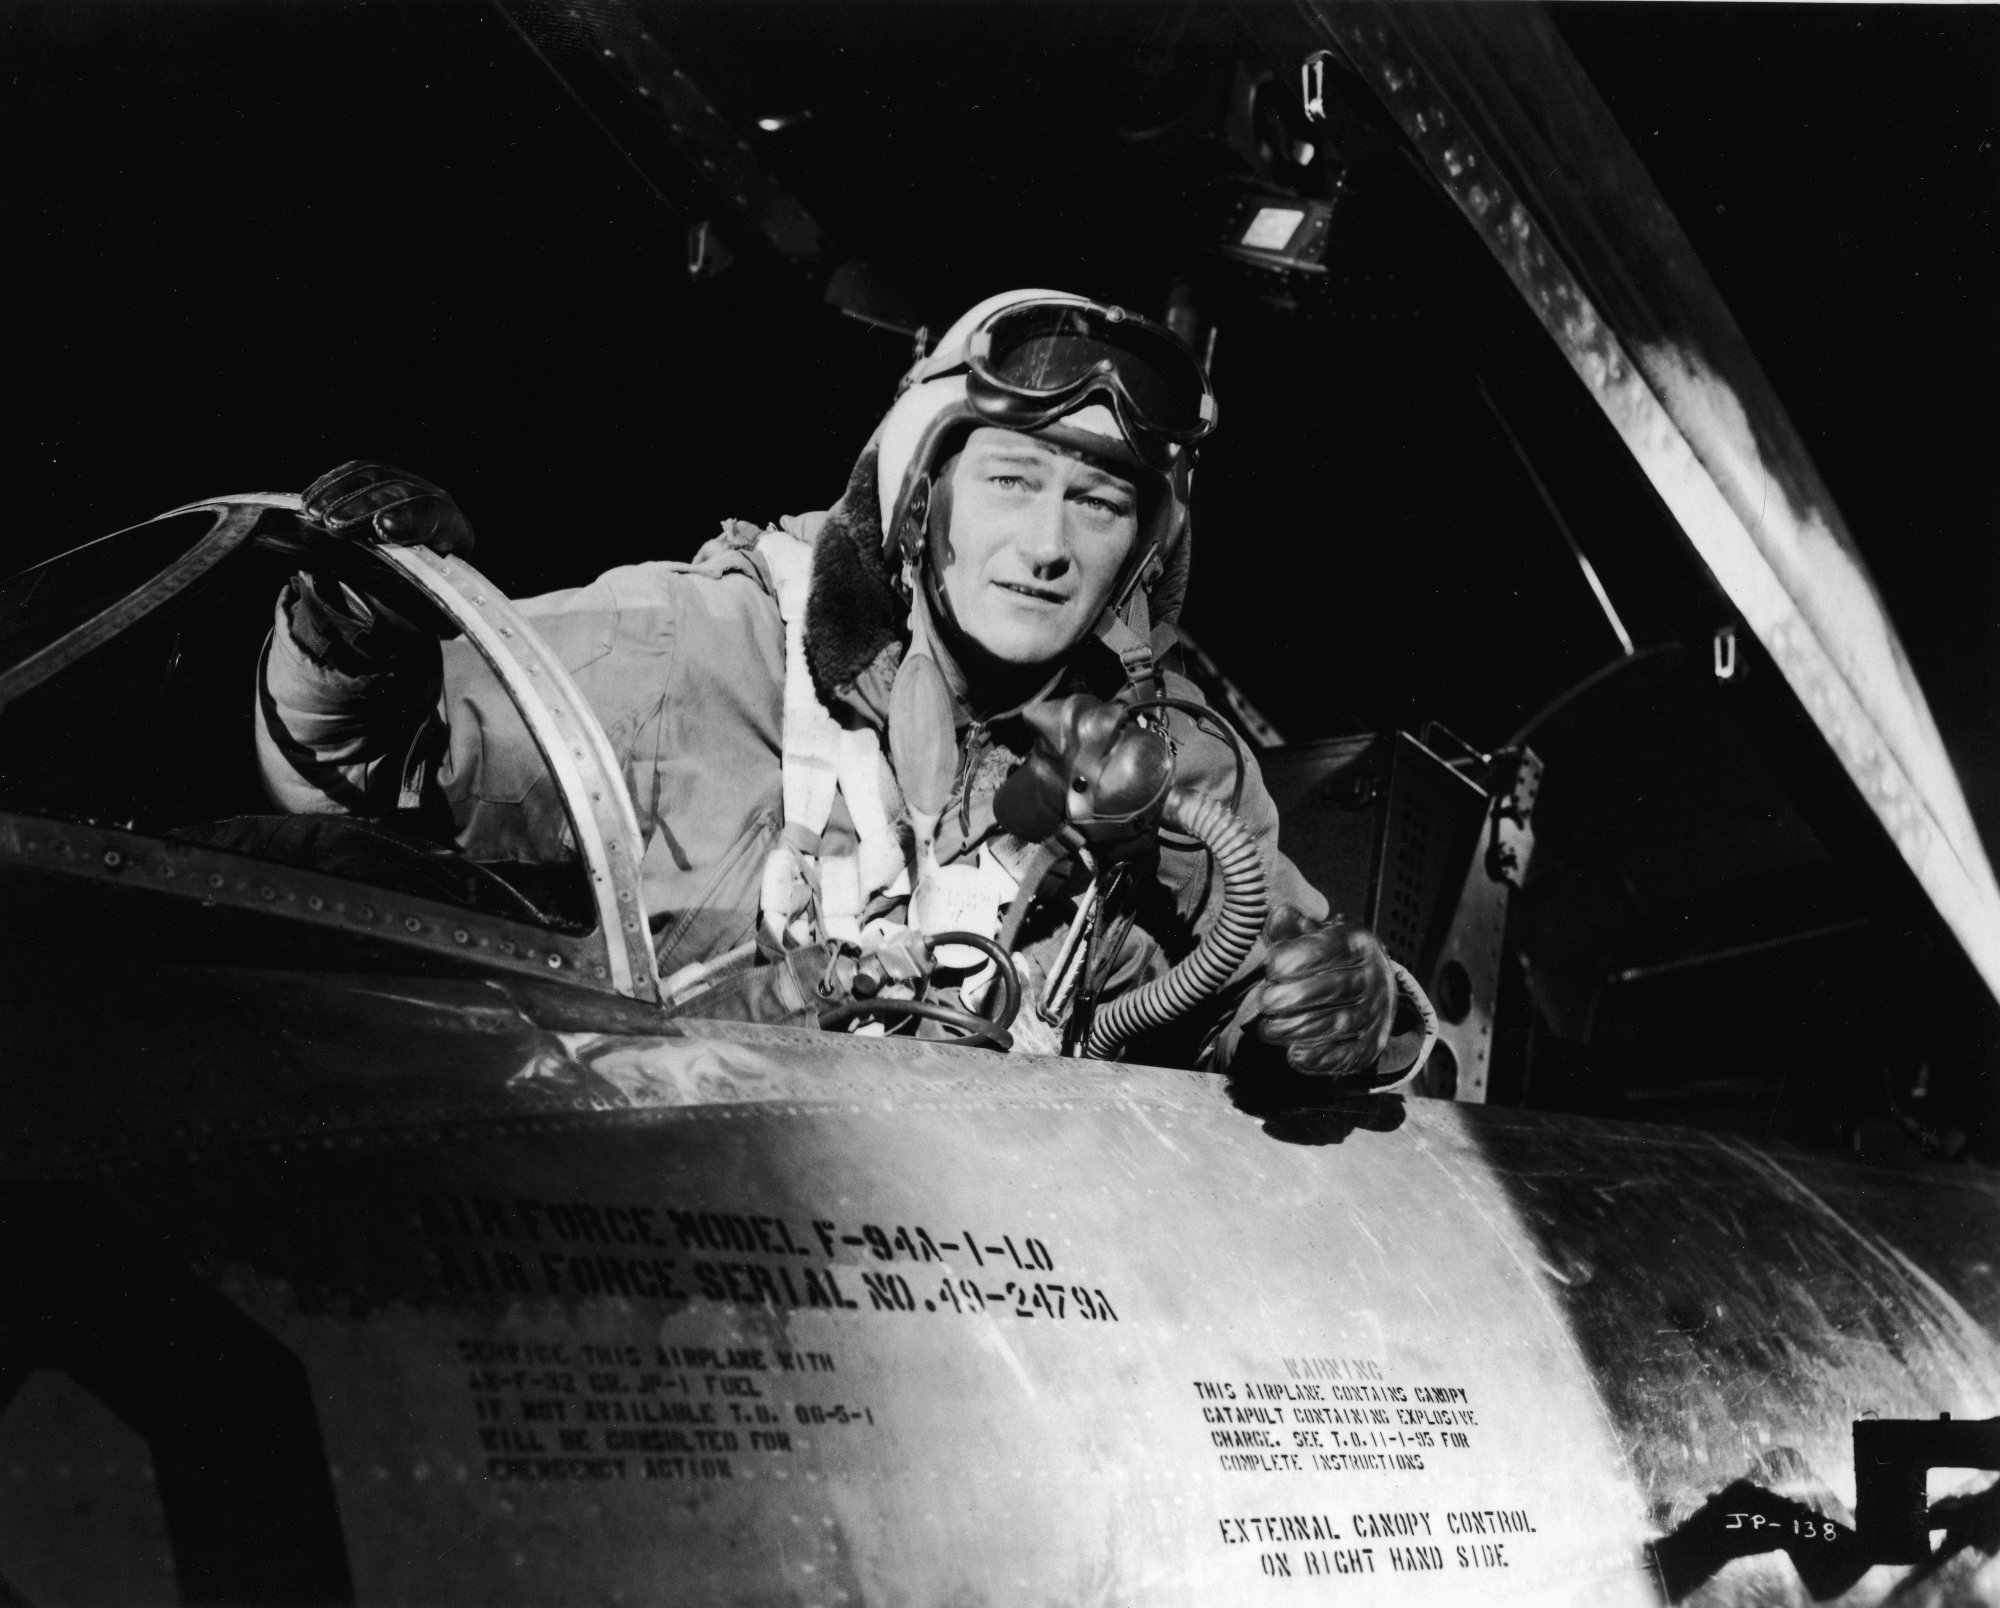 John Wayne as Col. Jim Shannon in 'Jet Pilot,' one of his worst movies. He's in a pilot uniform, sitting in the cockpit.